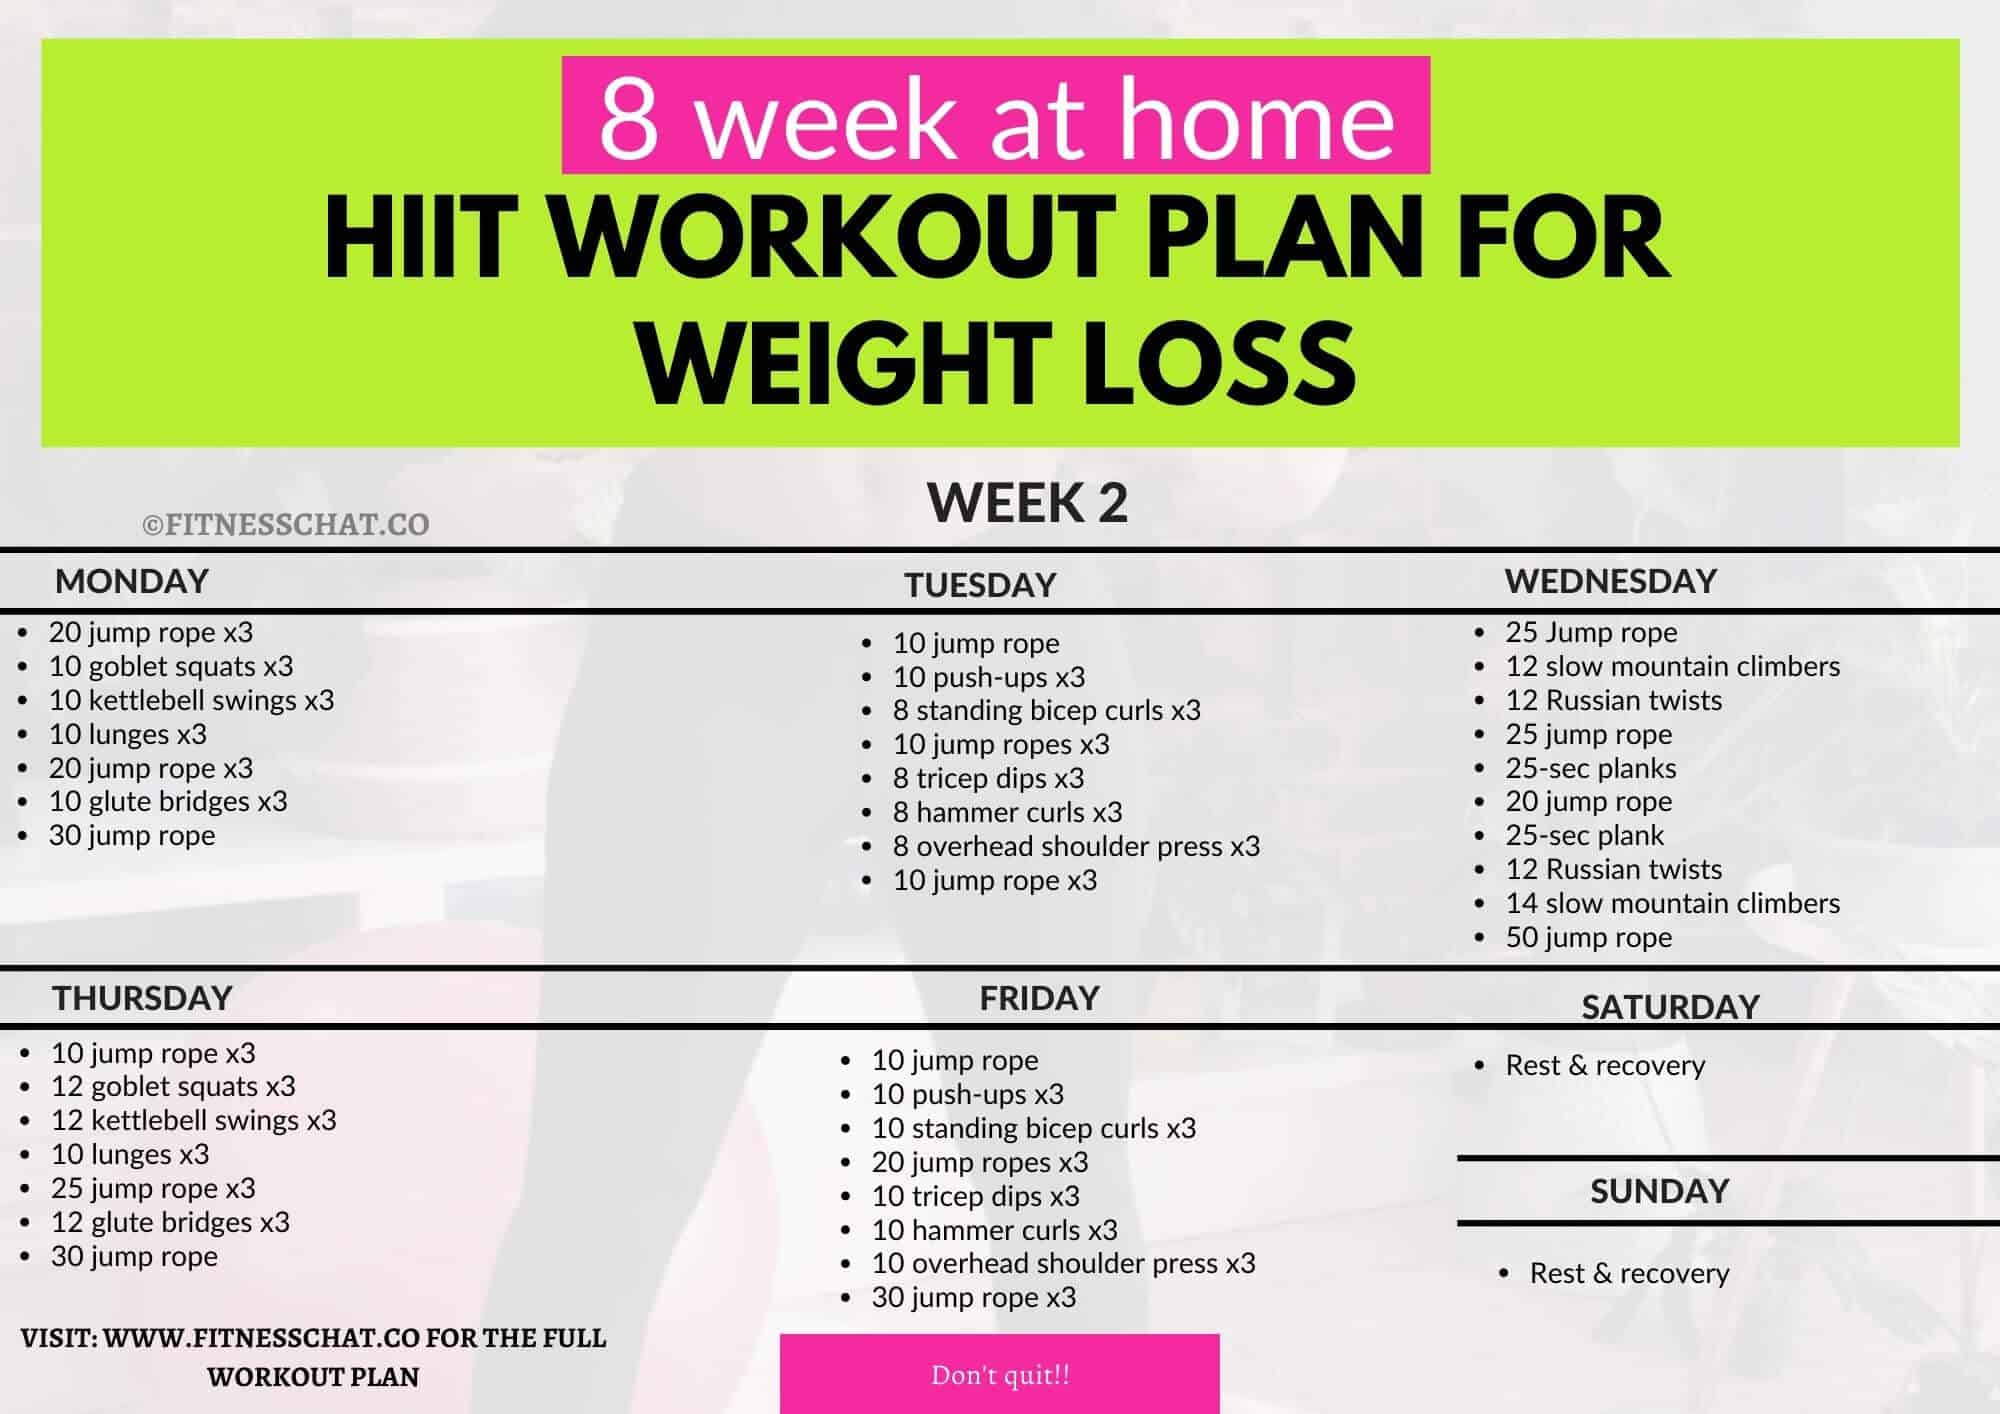 hiit workouts at home- week 2 